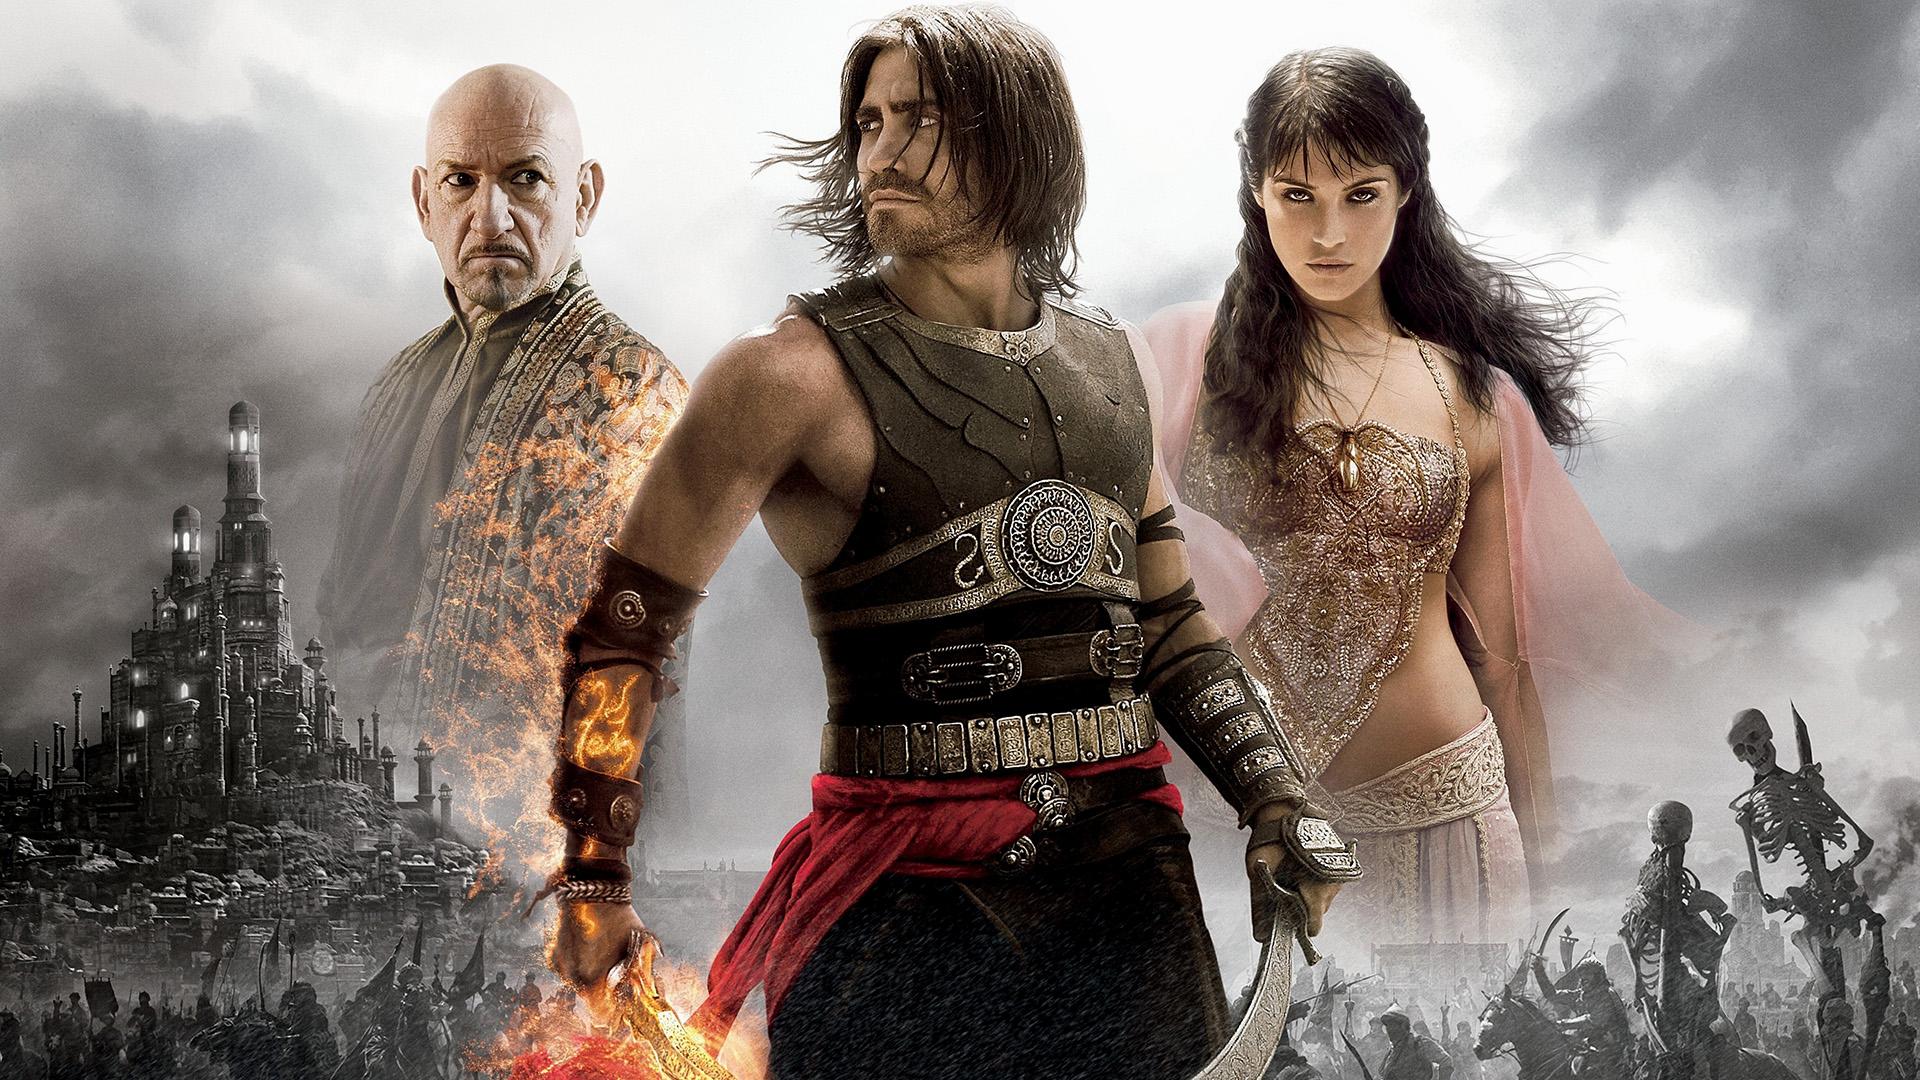 Movie Prince of Persia: The Sands of Time HD Wallpaper | Background Image